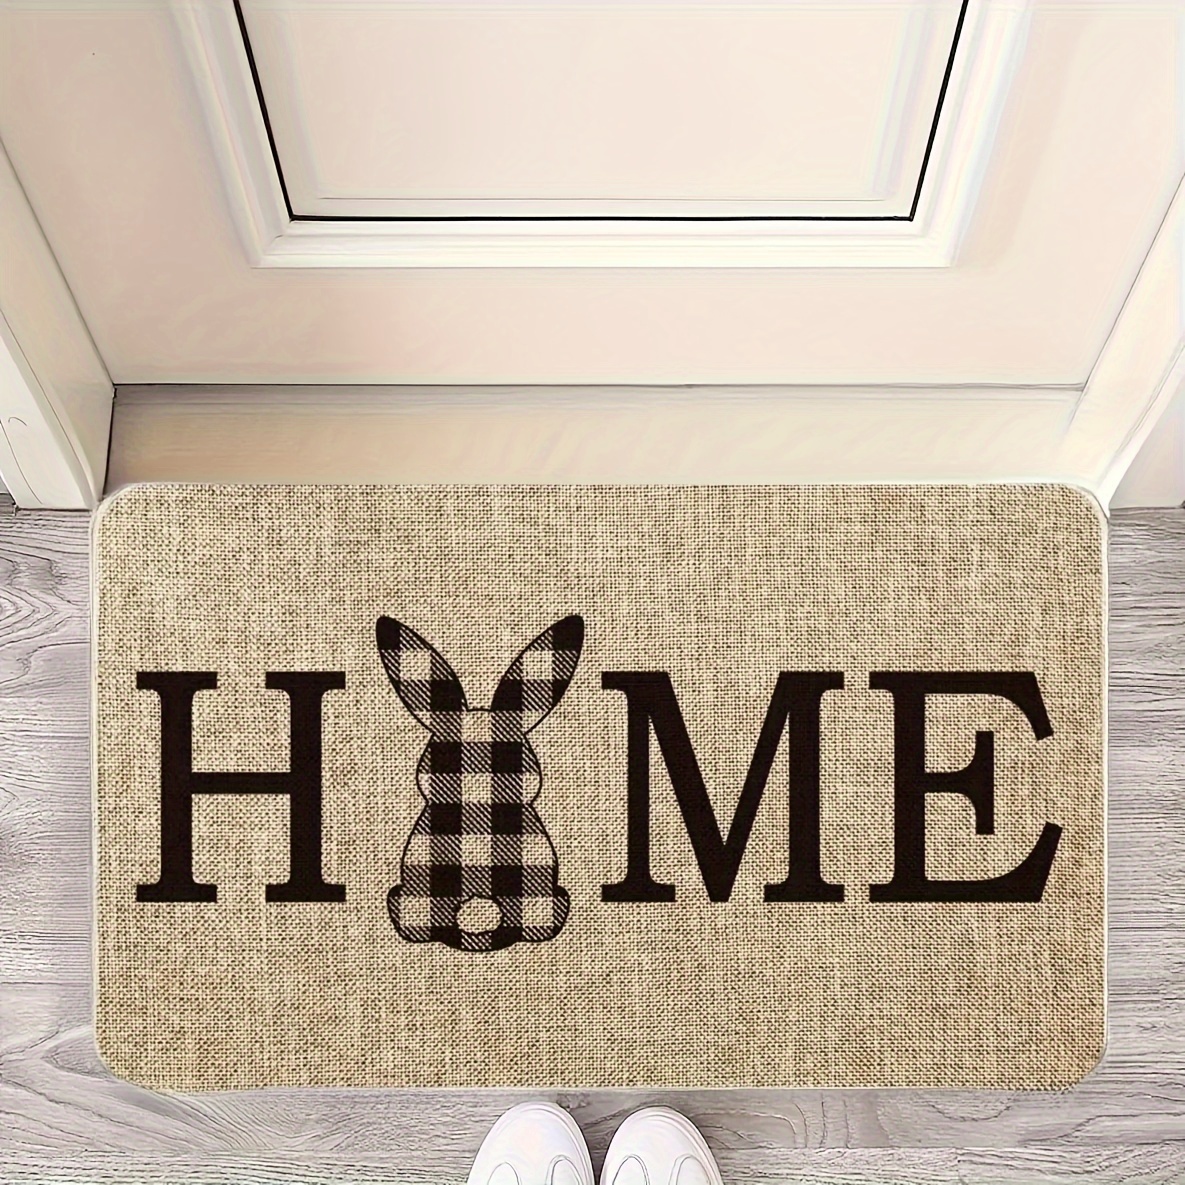 

1pc Happy Easter Rabbit Pattern Floor Mat, Non-skid Absorbent Bathroom Mat, Easter Day Entryway Decorative Rug, Bathroom Accessories, Home Decor